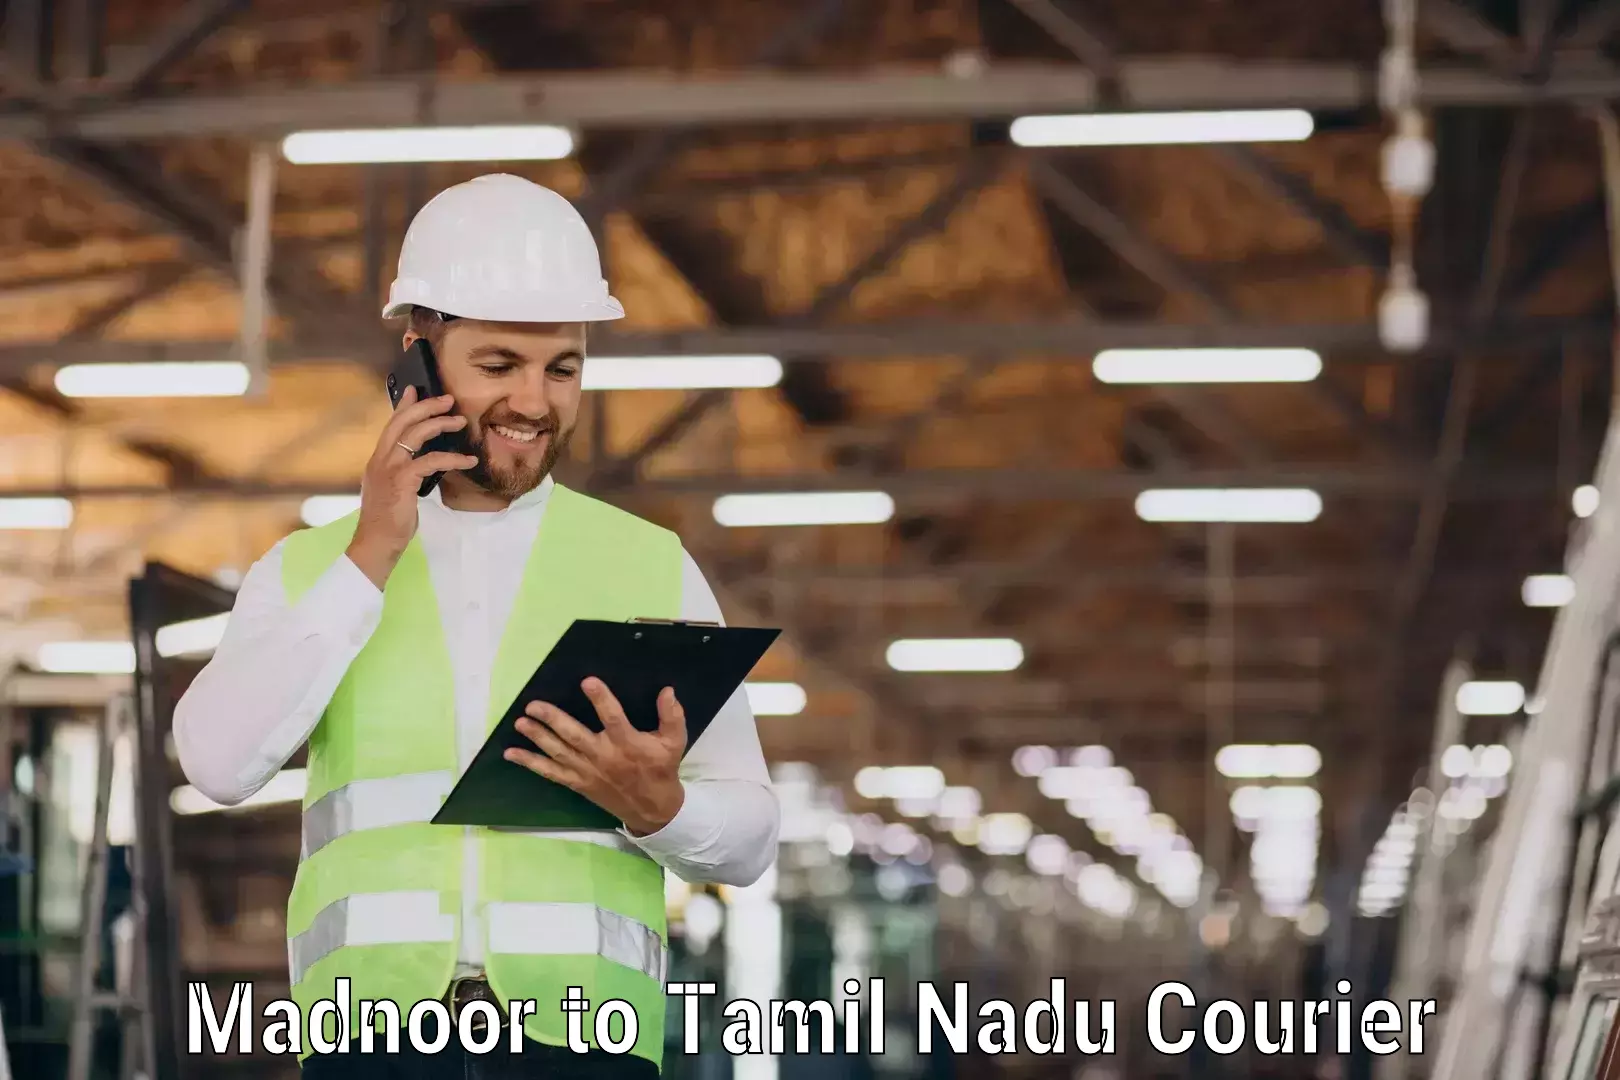 Professional delivery solutions Madnoor to Thiruvadanai